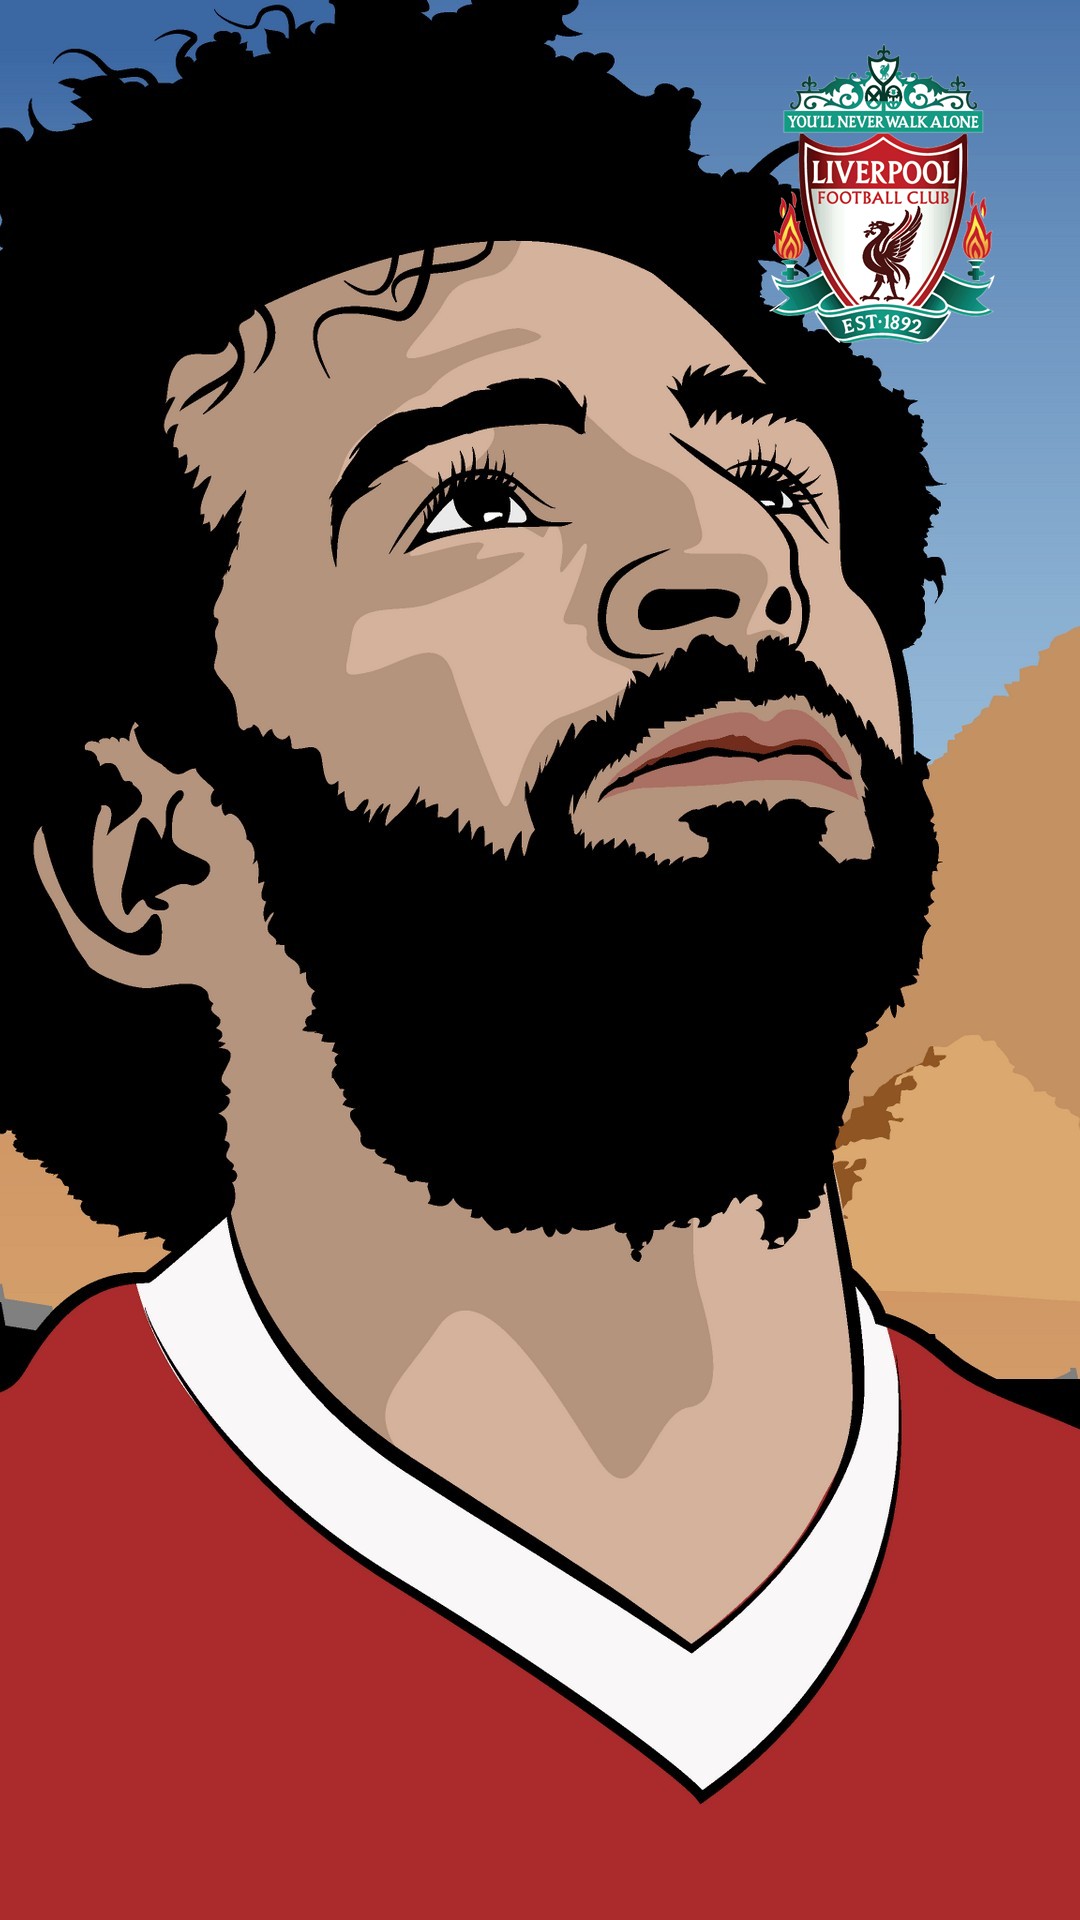 Android Wallpaper Mo Salah with image resolution 1080x1920 pixel. You can make this wallpaper for your Android backgrounds, Tablet, Smartphones Screensavers and Mobile Phone Lock Screen